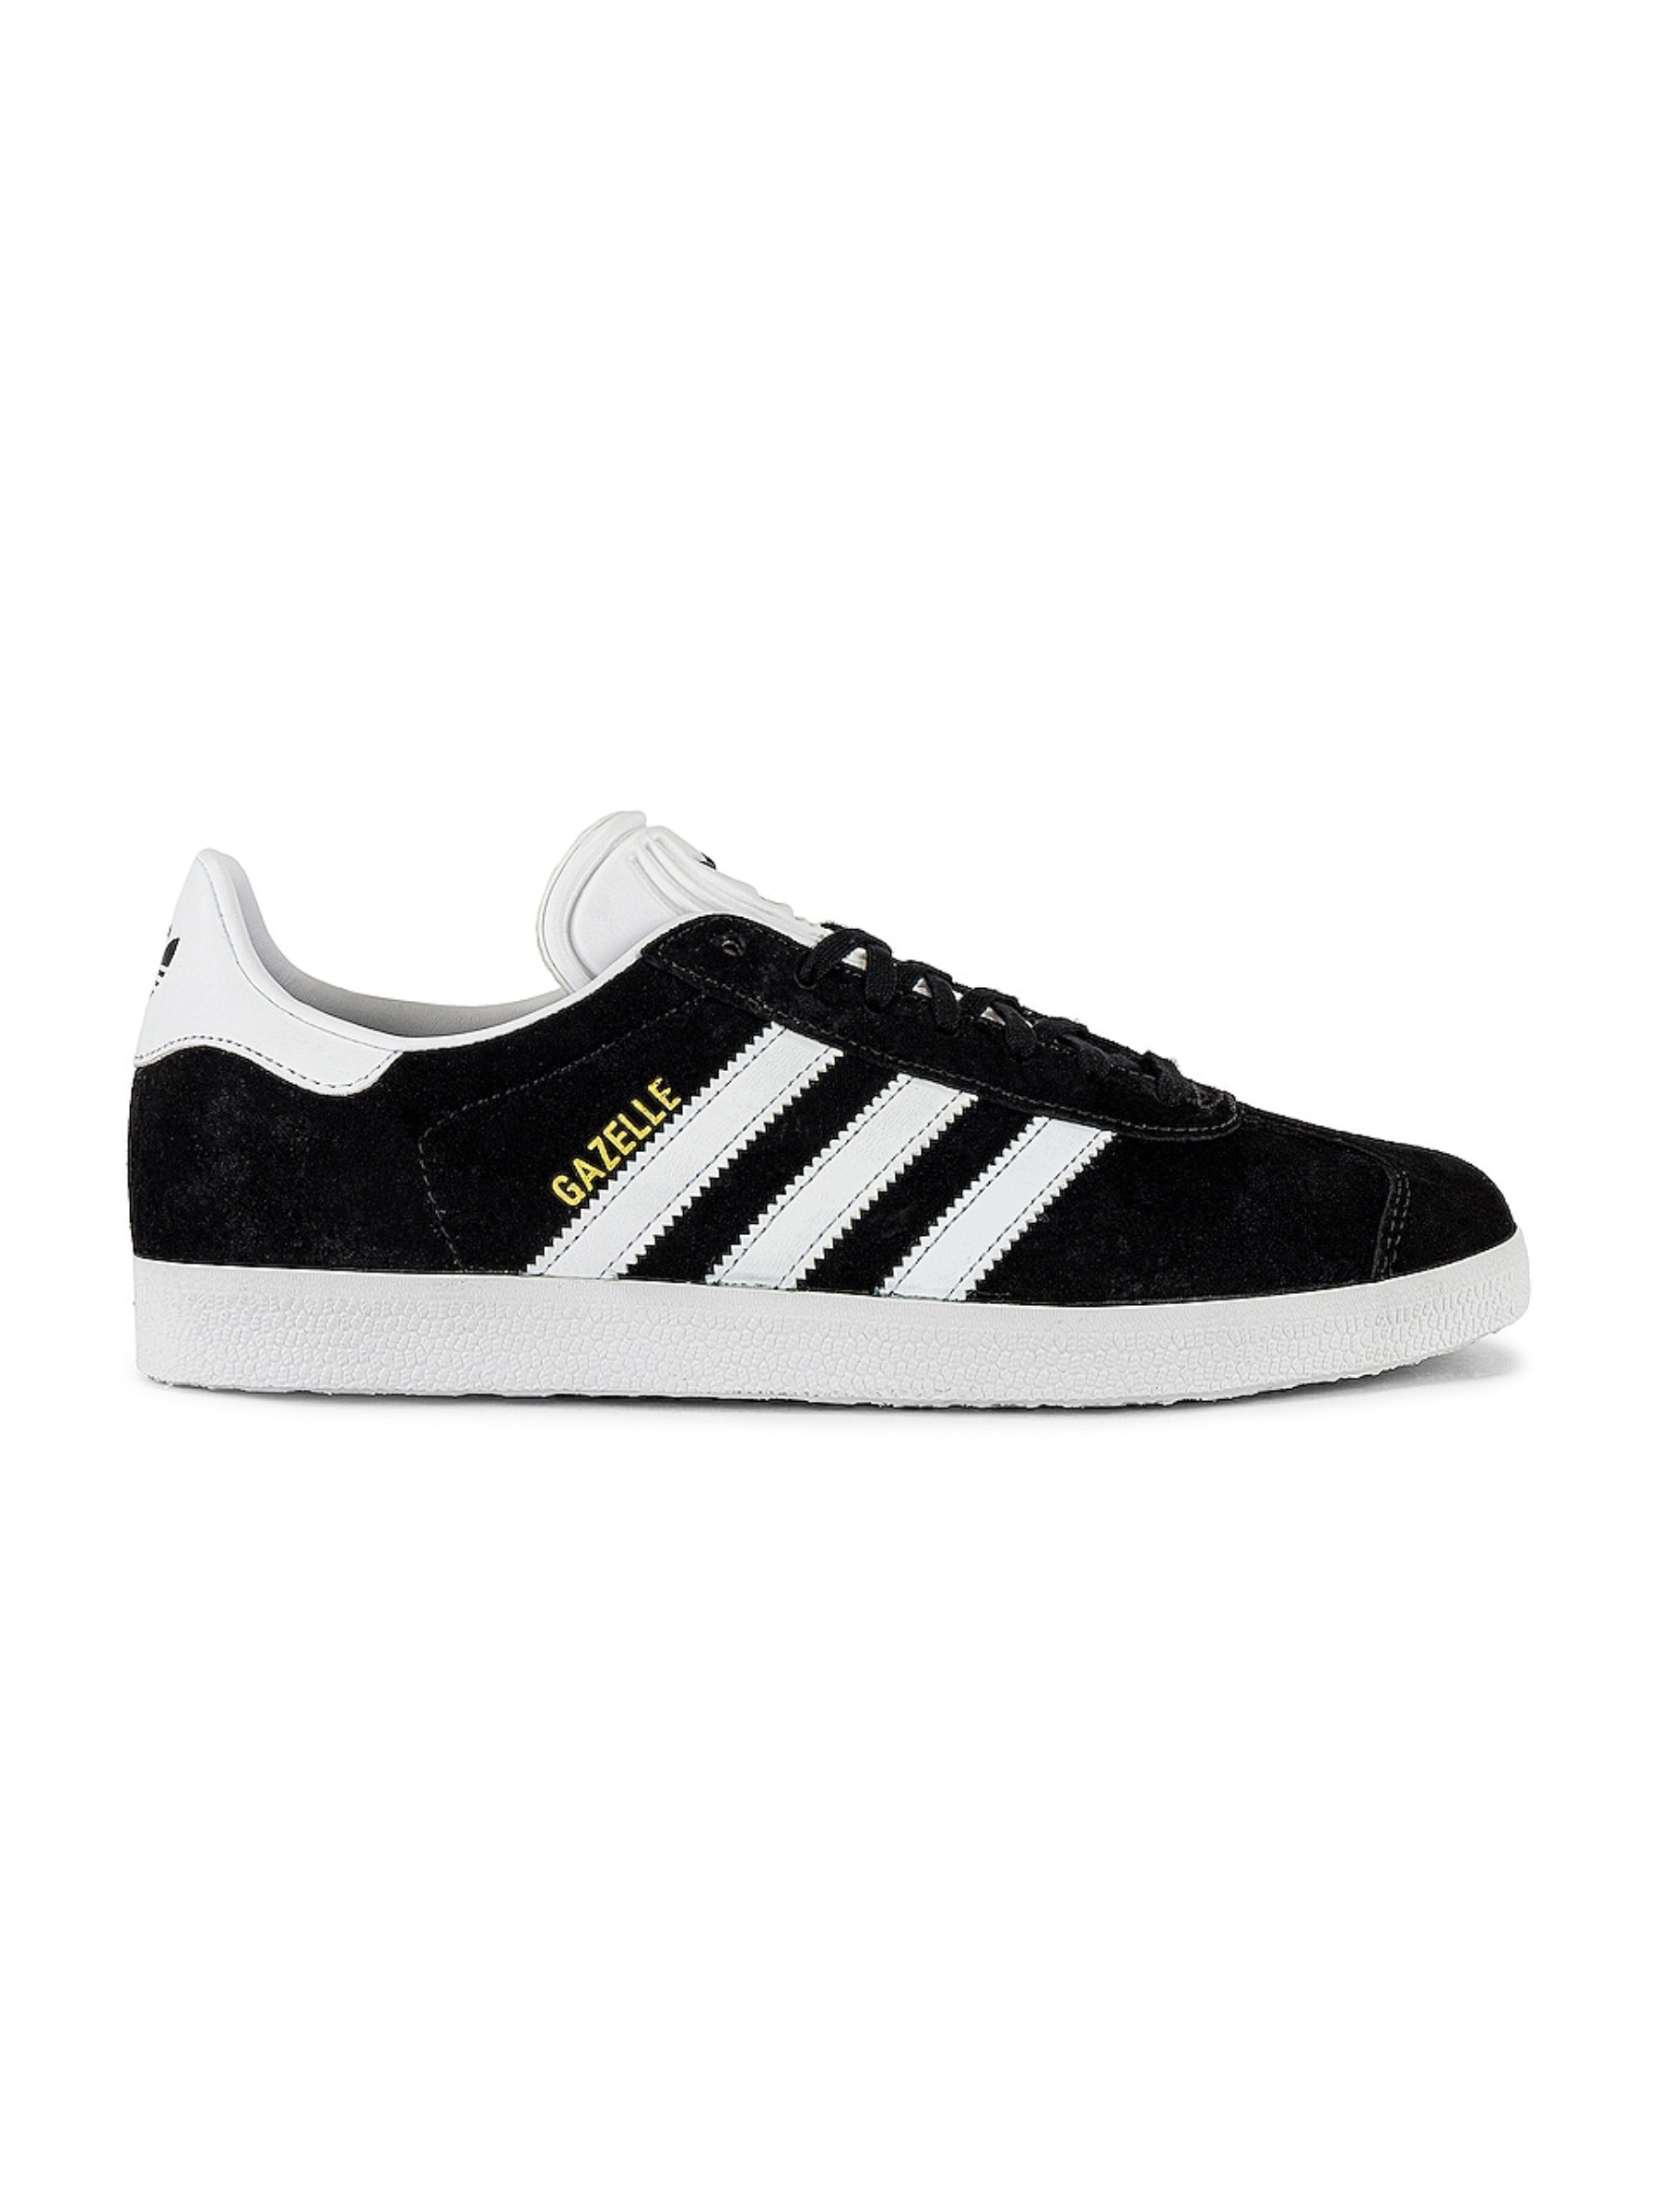 What goes around comes around. If these classic <a href="https://www.glamour.com/story/blue-adidas-sneakers?mbid=synd_msn_rss&utm_source=msn&utm_medium=syndication">Adidas sneaks</a> were your favorite as a teen, share the love by gifting with your 18-year-old a fresh pair. $100, Nordstrom. <a href="https://www.nordstrom.com/s/adidas-gazelle-sneaker-men/4387102?">Get it now!</a><p>Sign up for today’s biggest stories, from pop culture to politics.</p><a href="https://www.glamour.com/newsletter/news?sourceCode=msnsend">Sign Up</a>